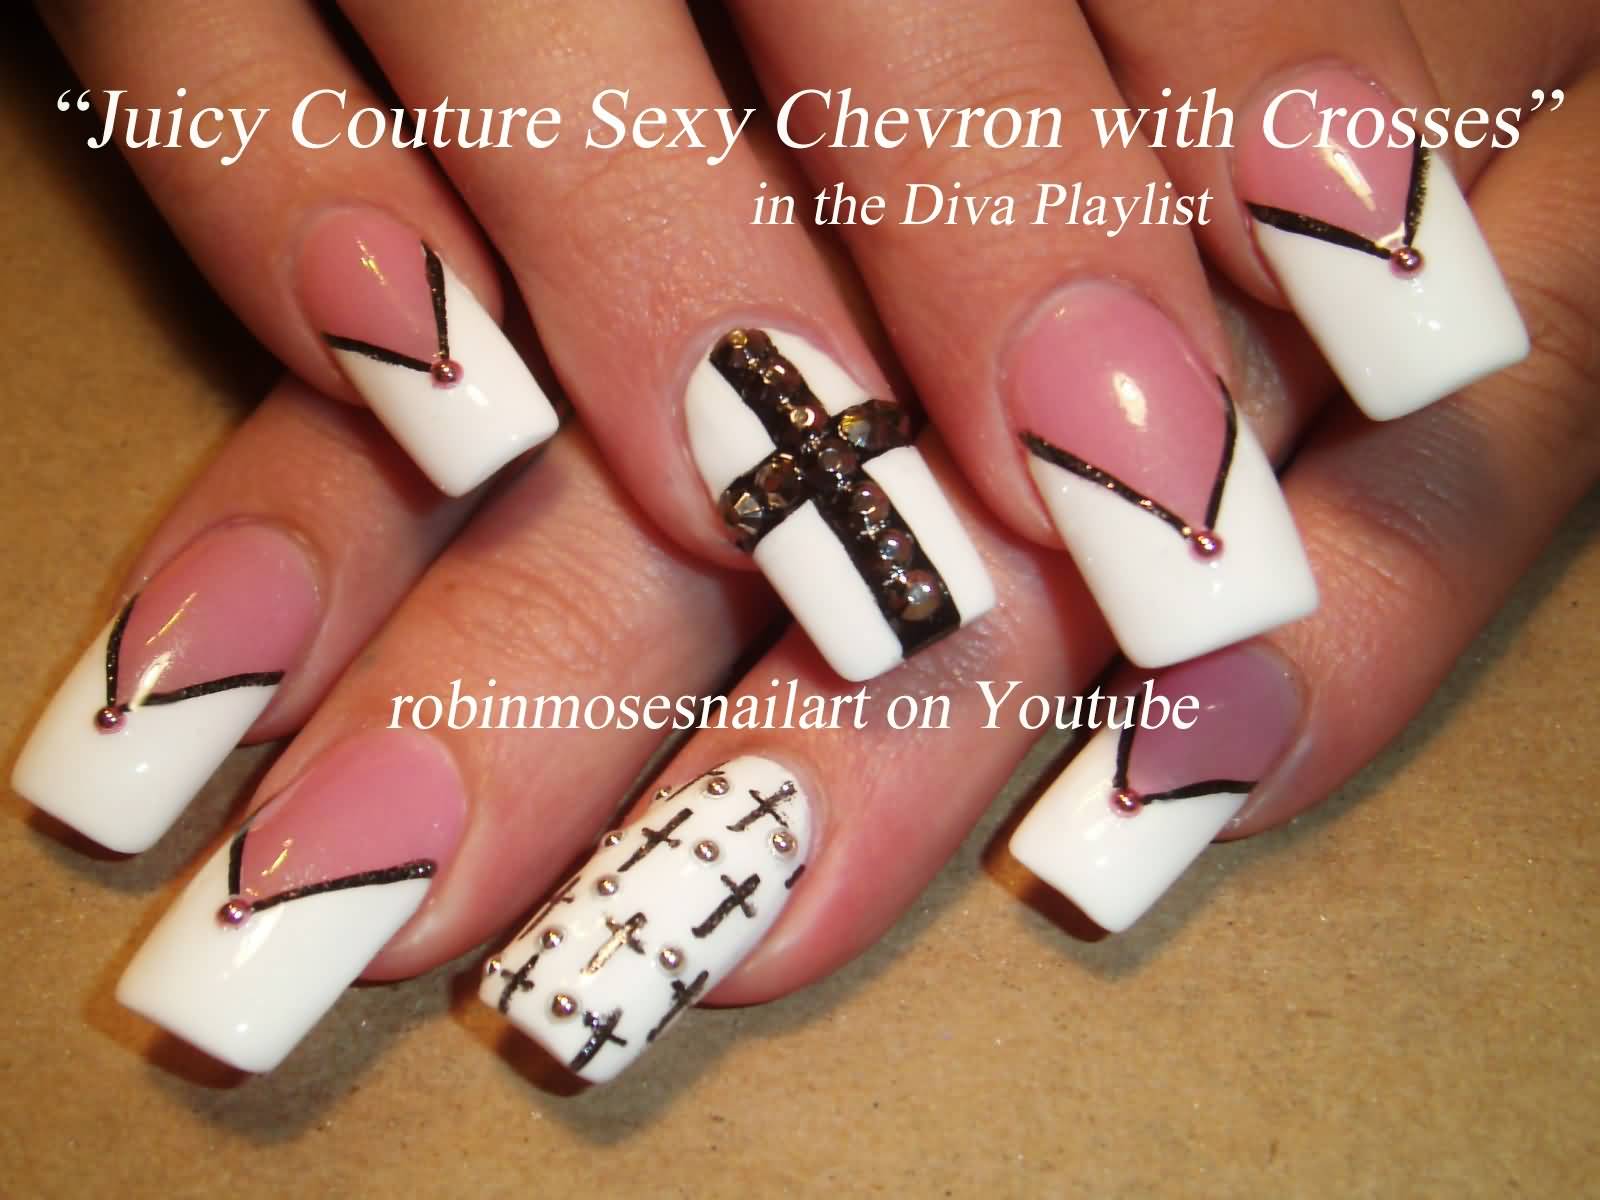 Juicy Couture Chevron Nail Art With Crosses